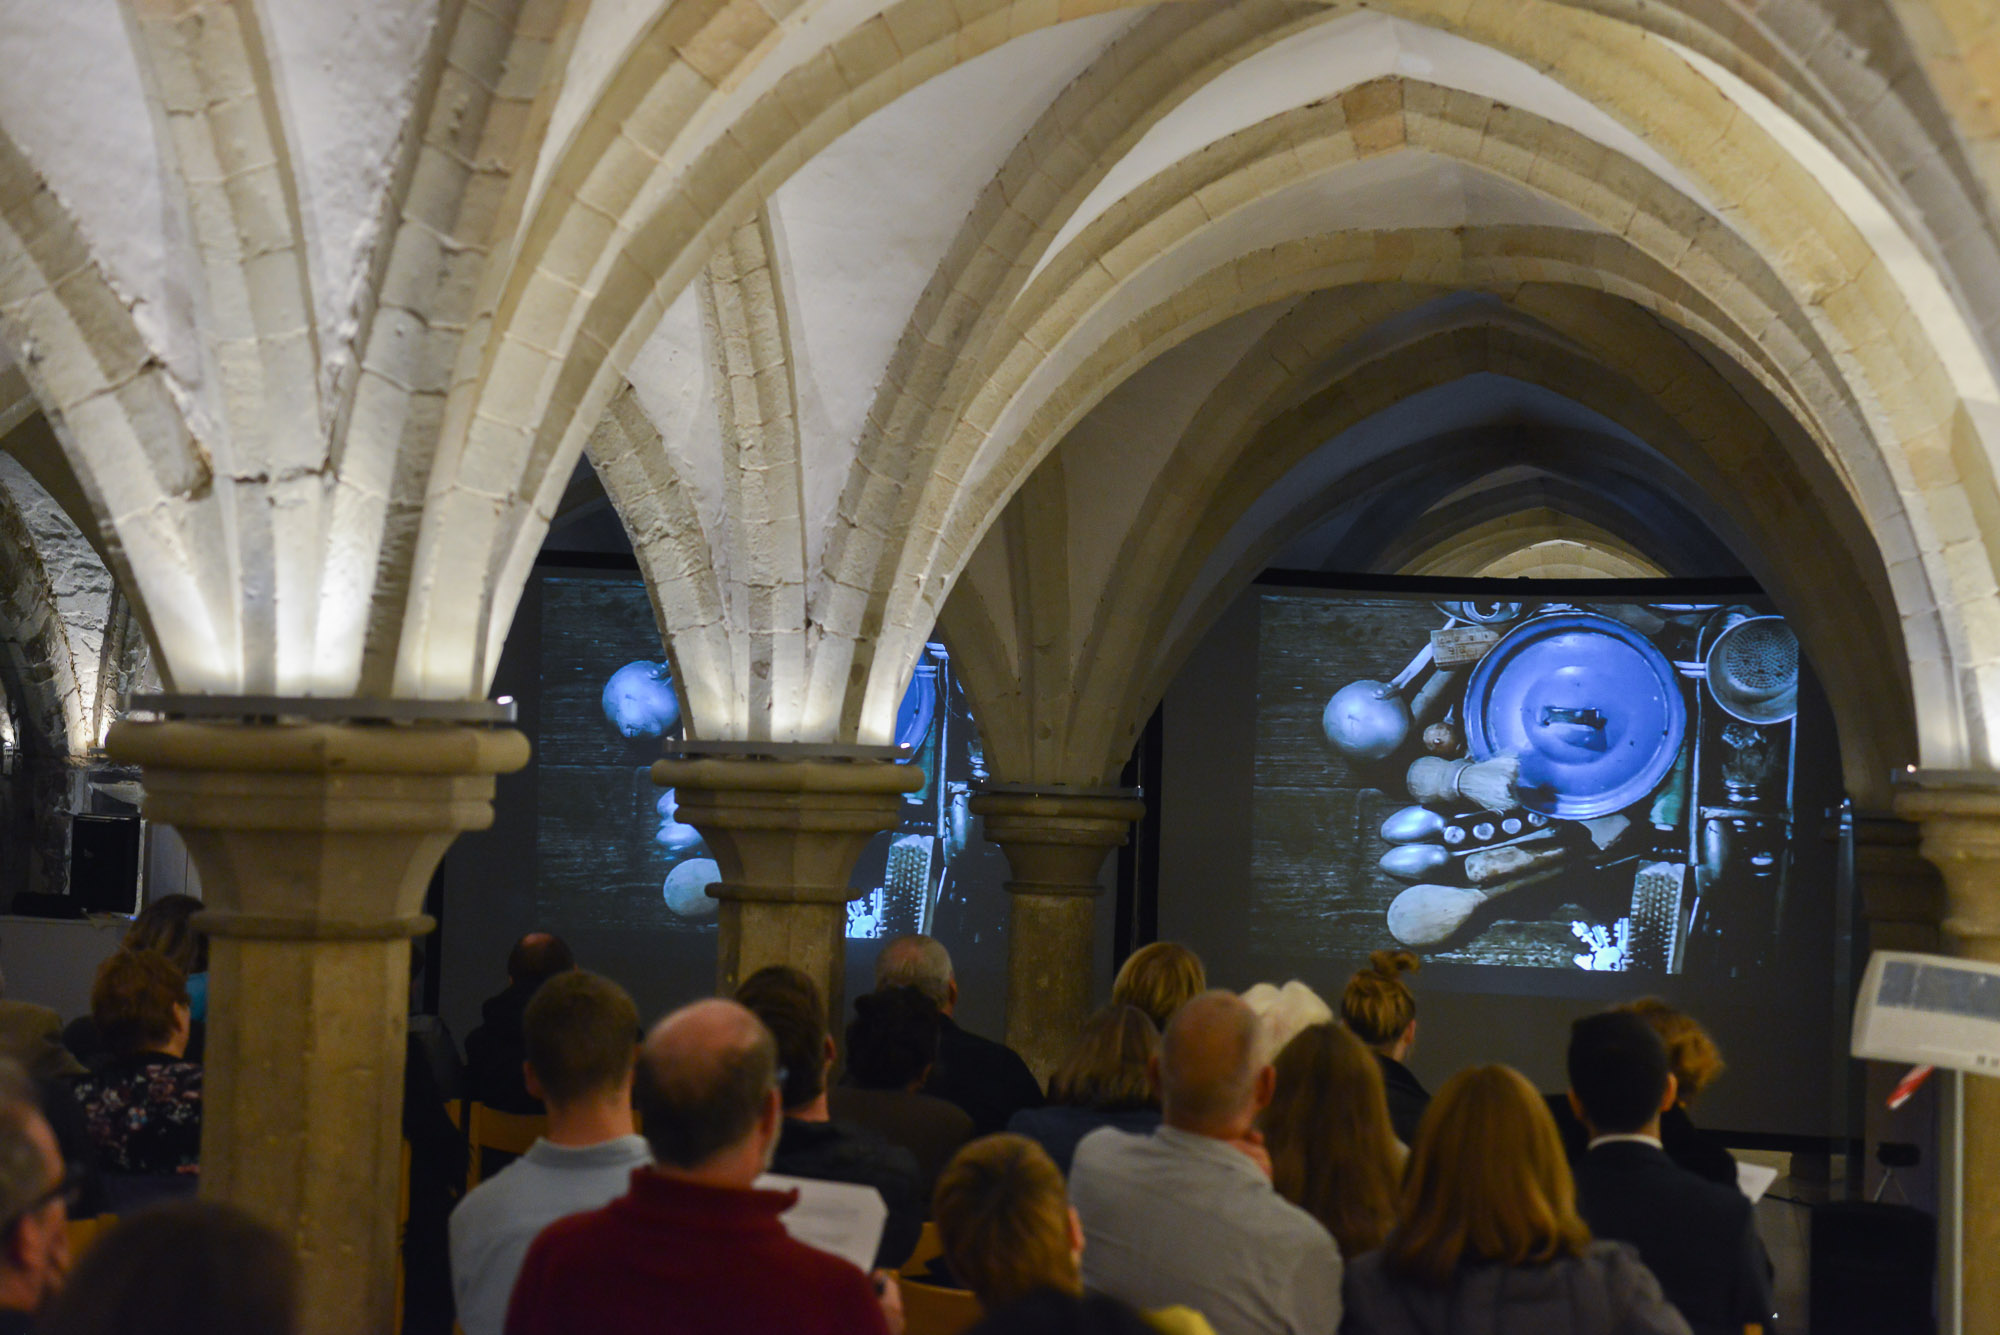 Dimensions of Dialogue, 1934, Jan Svankmajer. Rochester Launch, photos by Keith Greenfield. ©51zero